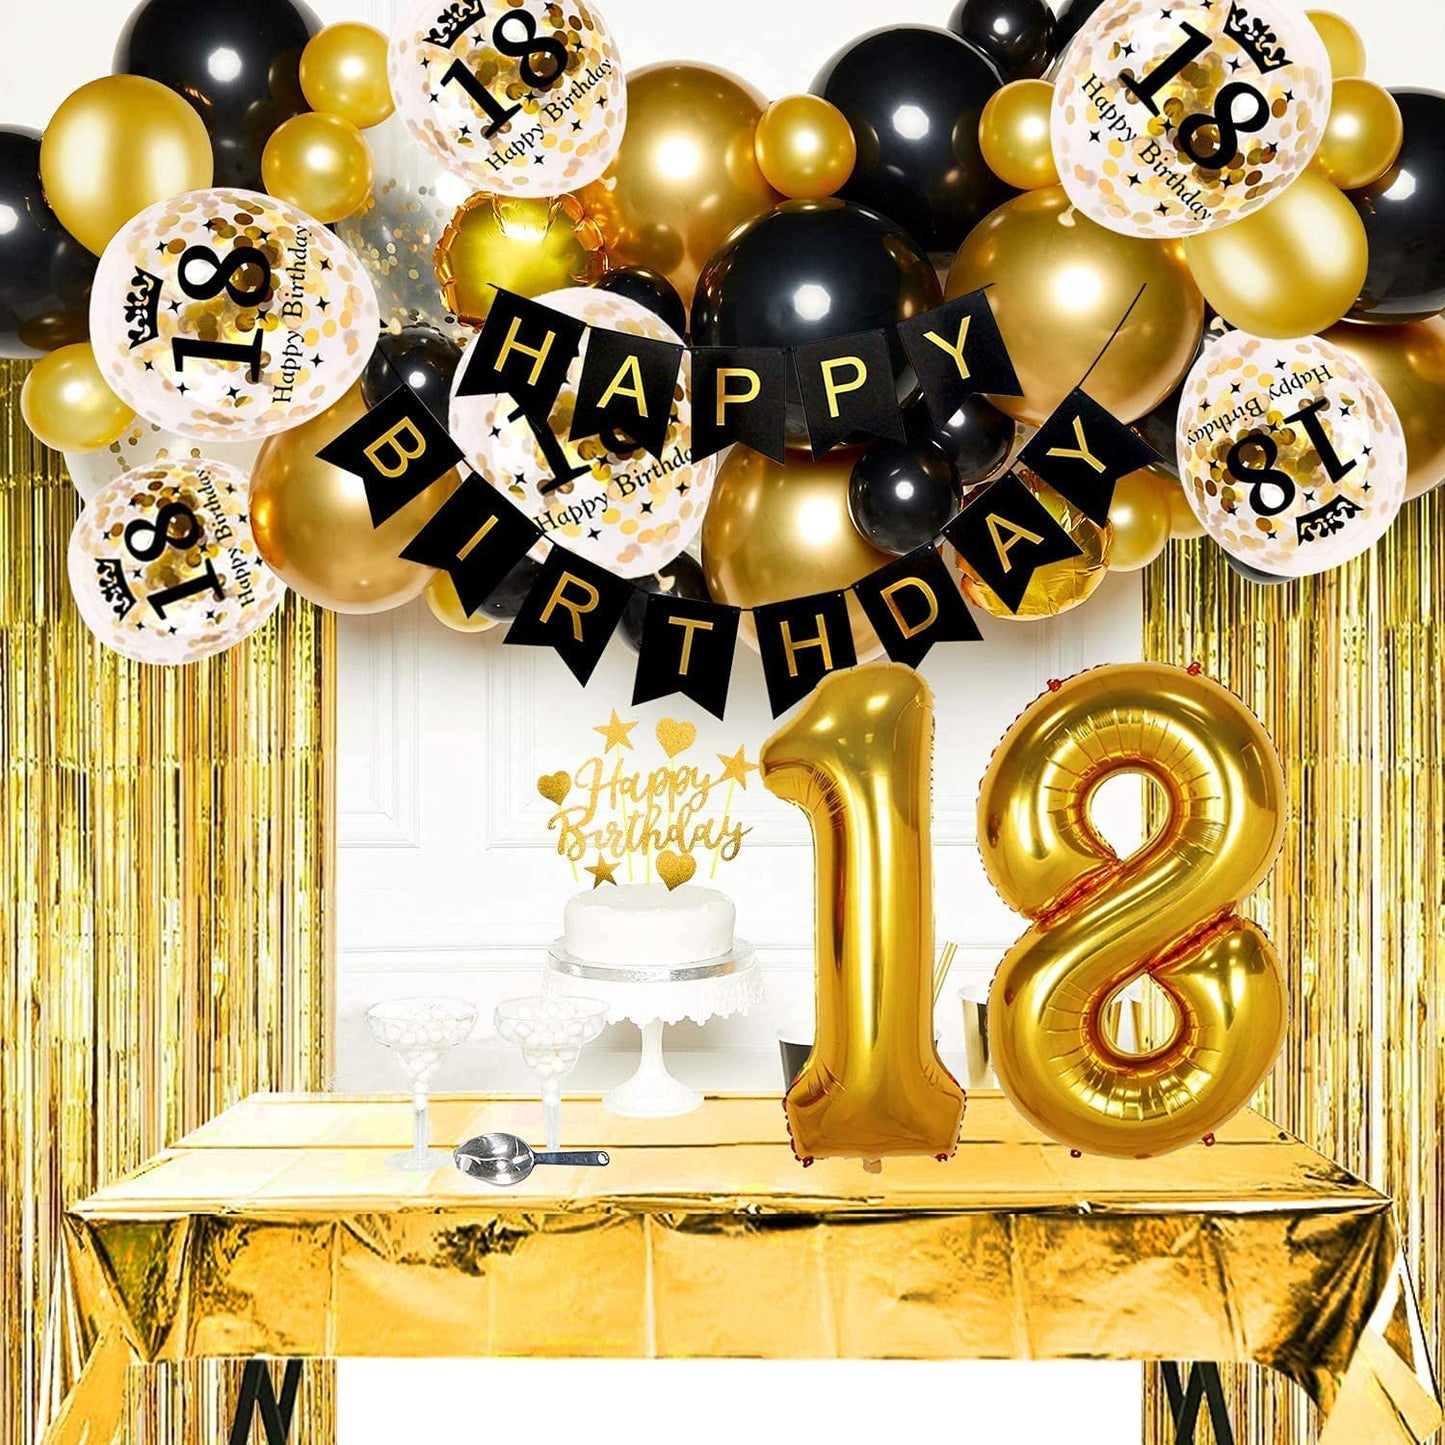 Humairc 18th Black Gold Birthday Party Decoration Happy Birthday Banner Number 18 40inch 2 Fringe Curtain Foil Tablecloth Confetti Balloon Cake Topper Table Confetti Kids Adult Man Woman